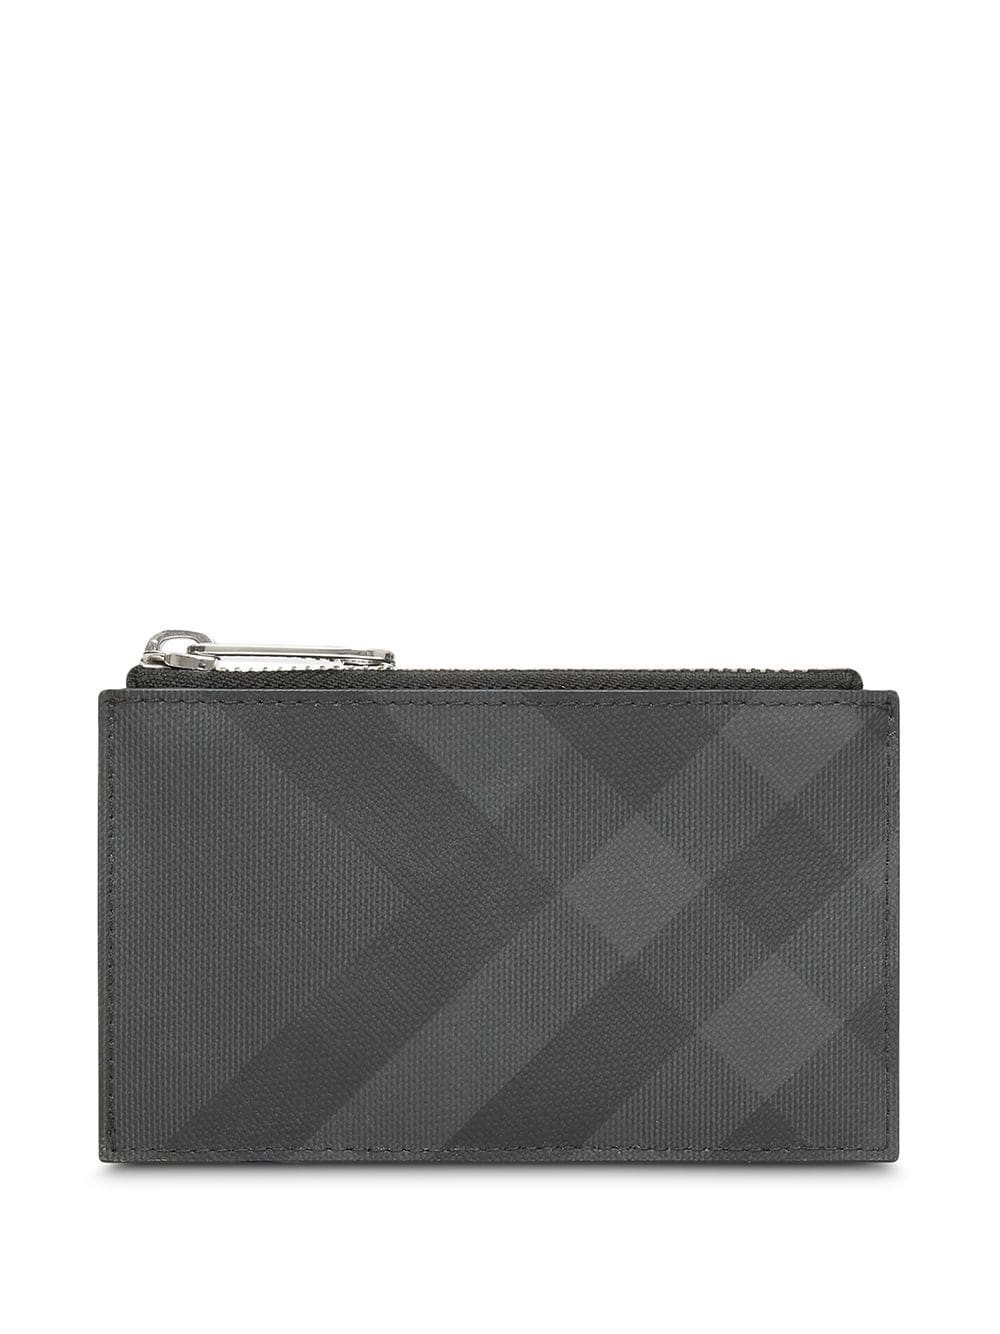 burberry ZIPPED CARD HOLDER available on  - 29405